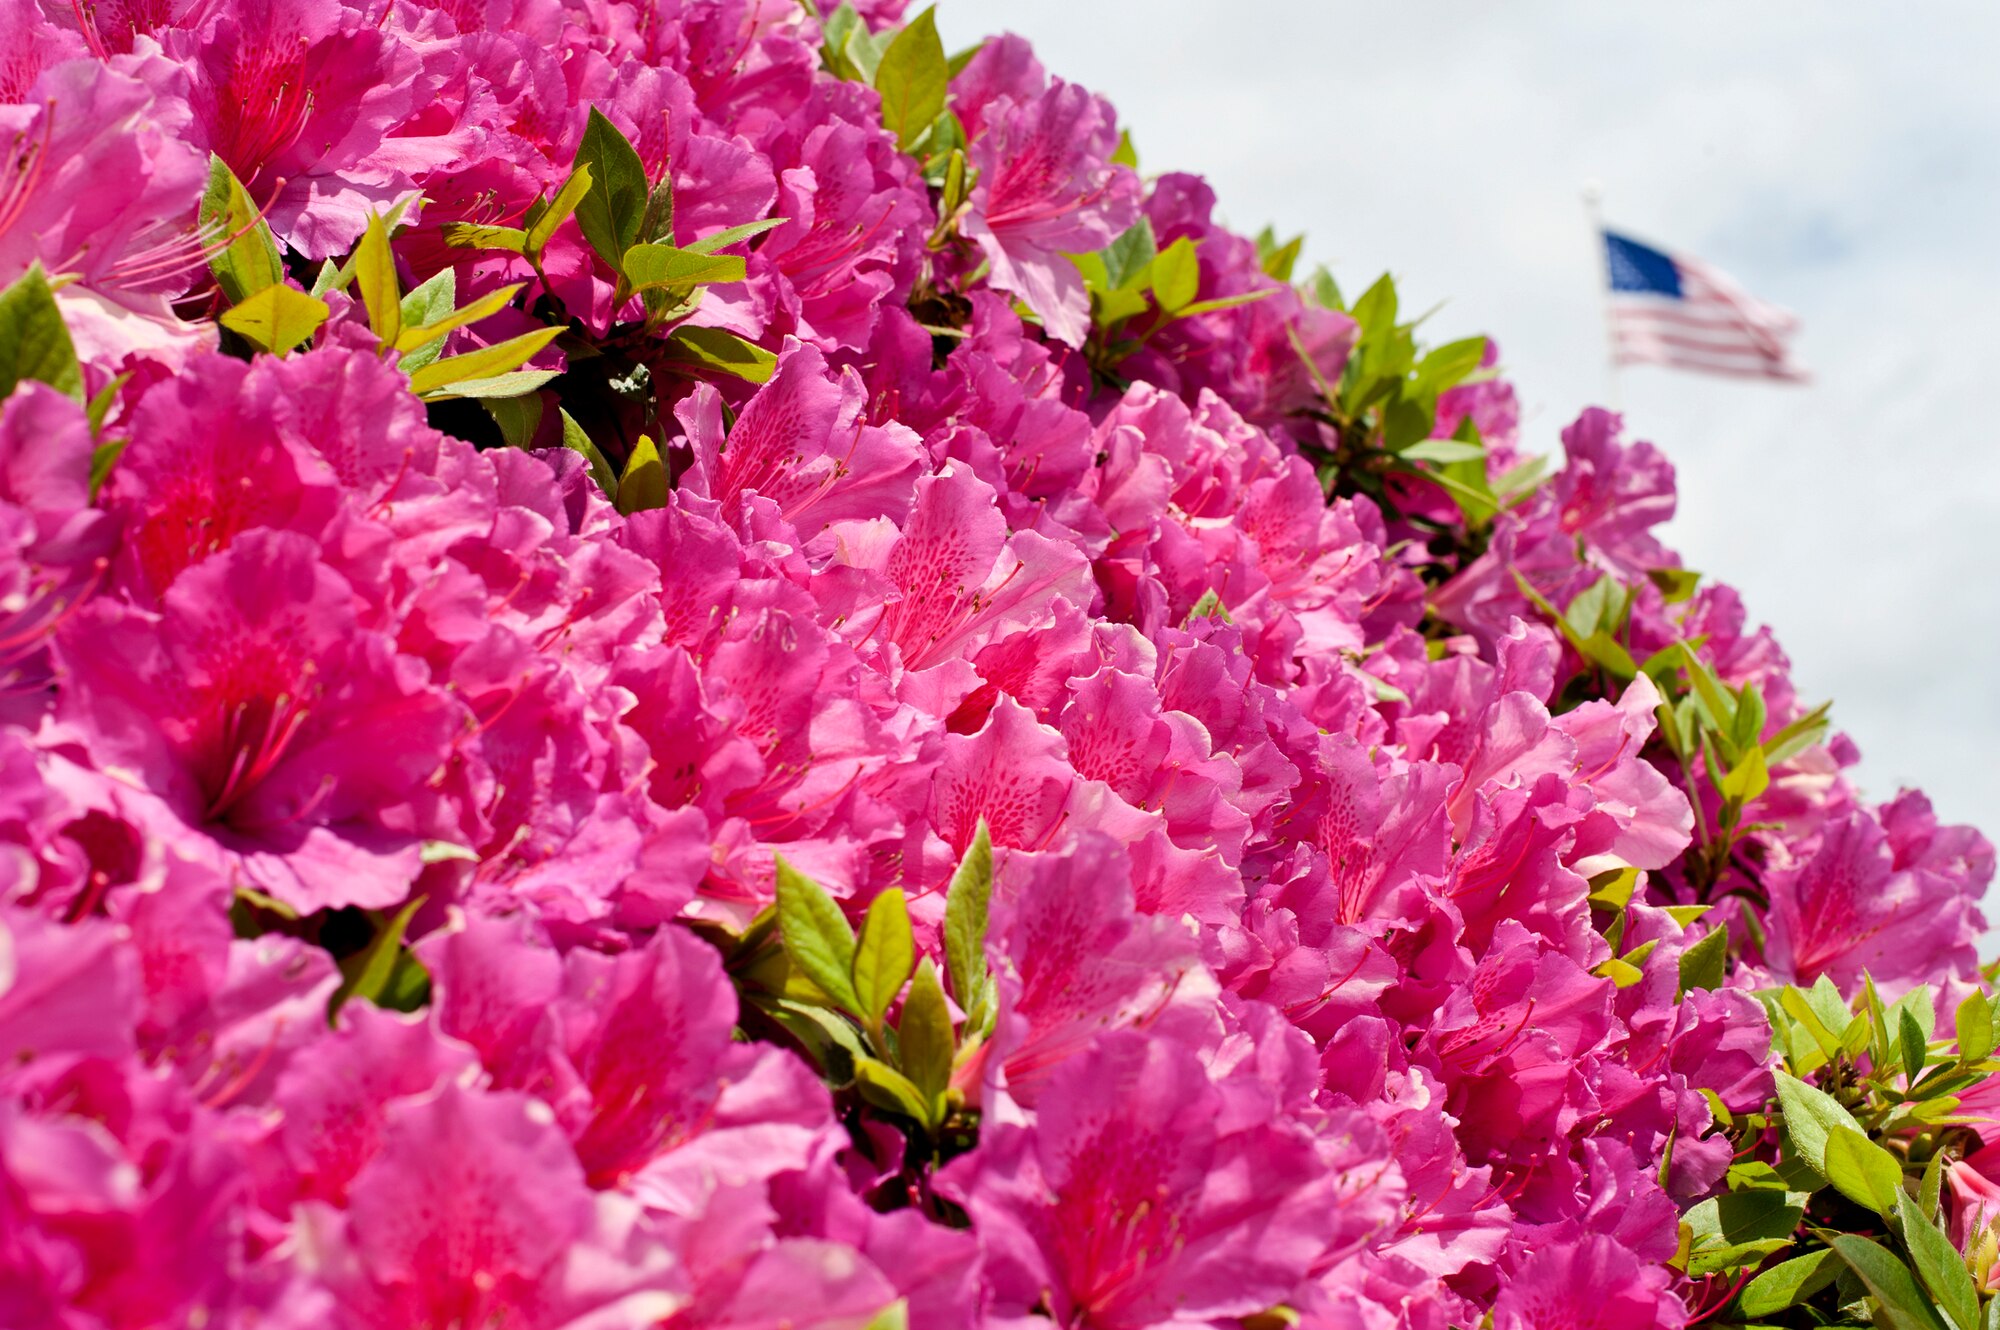 The base flag flies over the blooming Azalea bushes in front of the Air Armament Center headquarters March 31.  All of the Azalea bushes were in full bloom last week around the building.(U.S. Air Force photo/Samuel King Jr.)